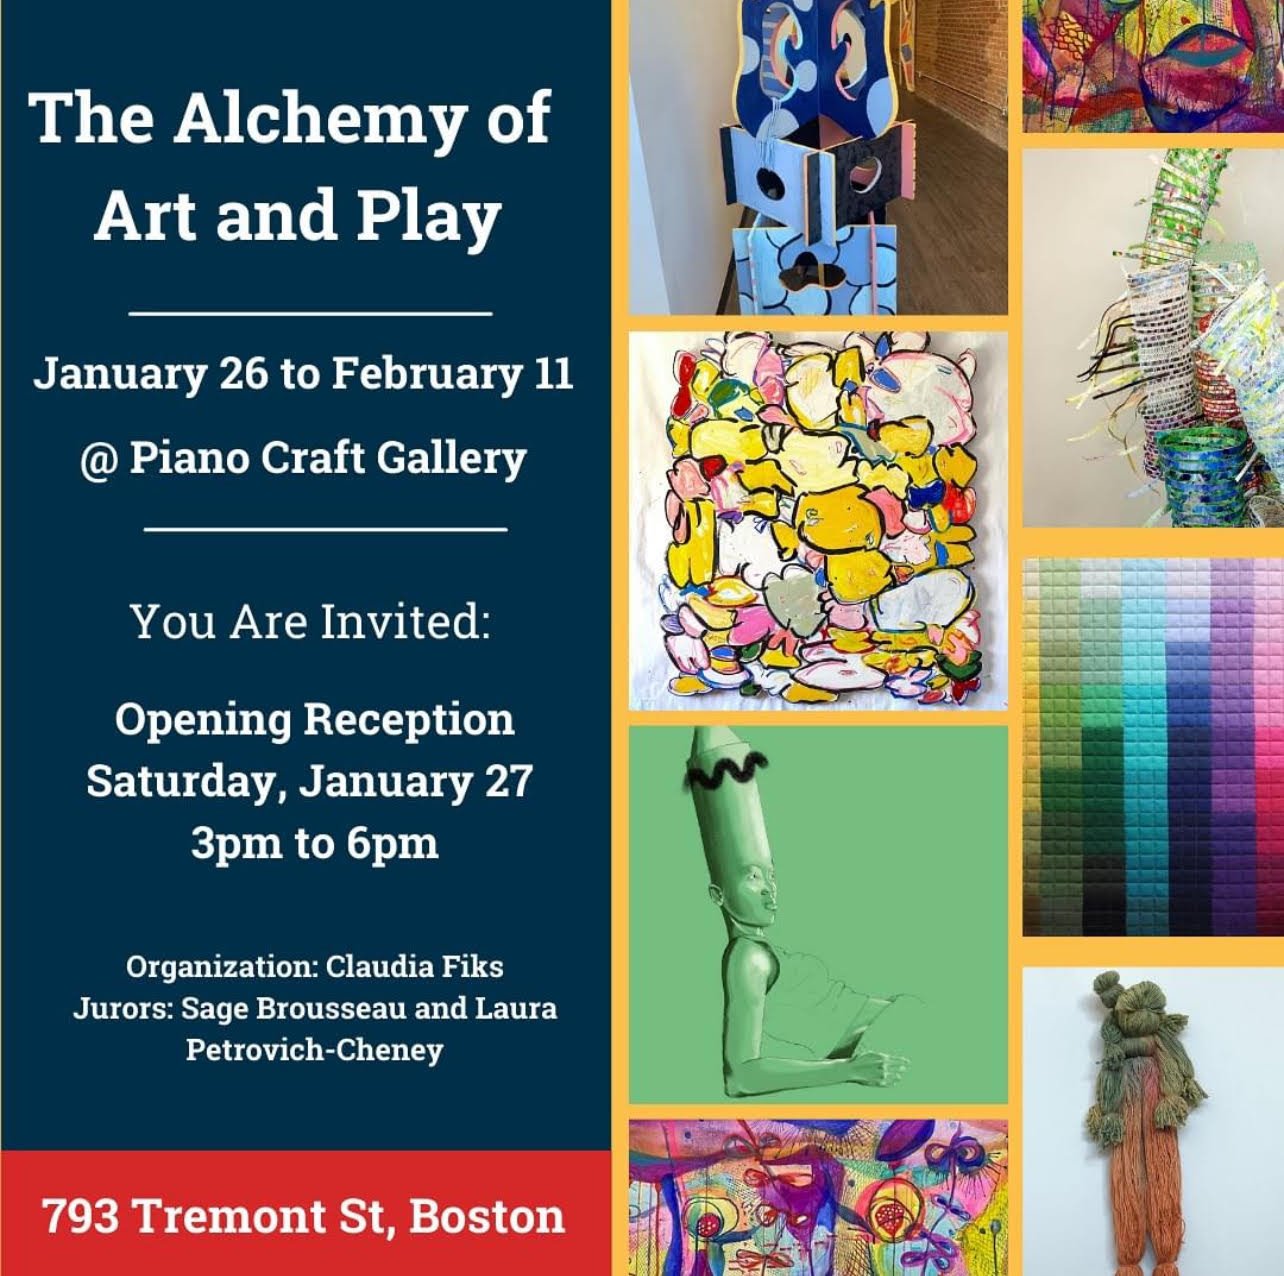  Poster for “The Alchemy of Art and Play” which includes work by Virginia Mahoney 